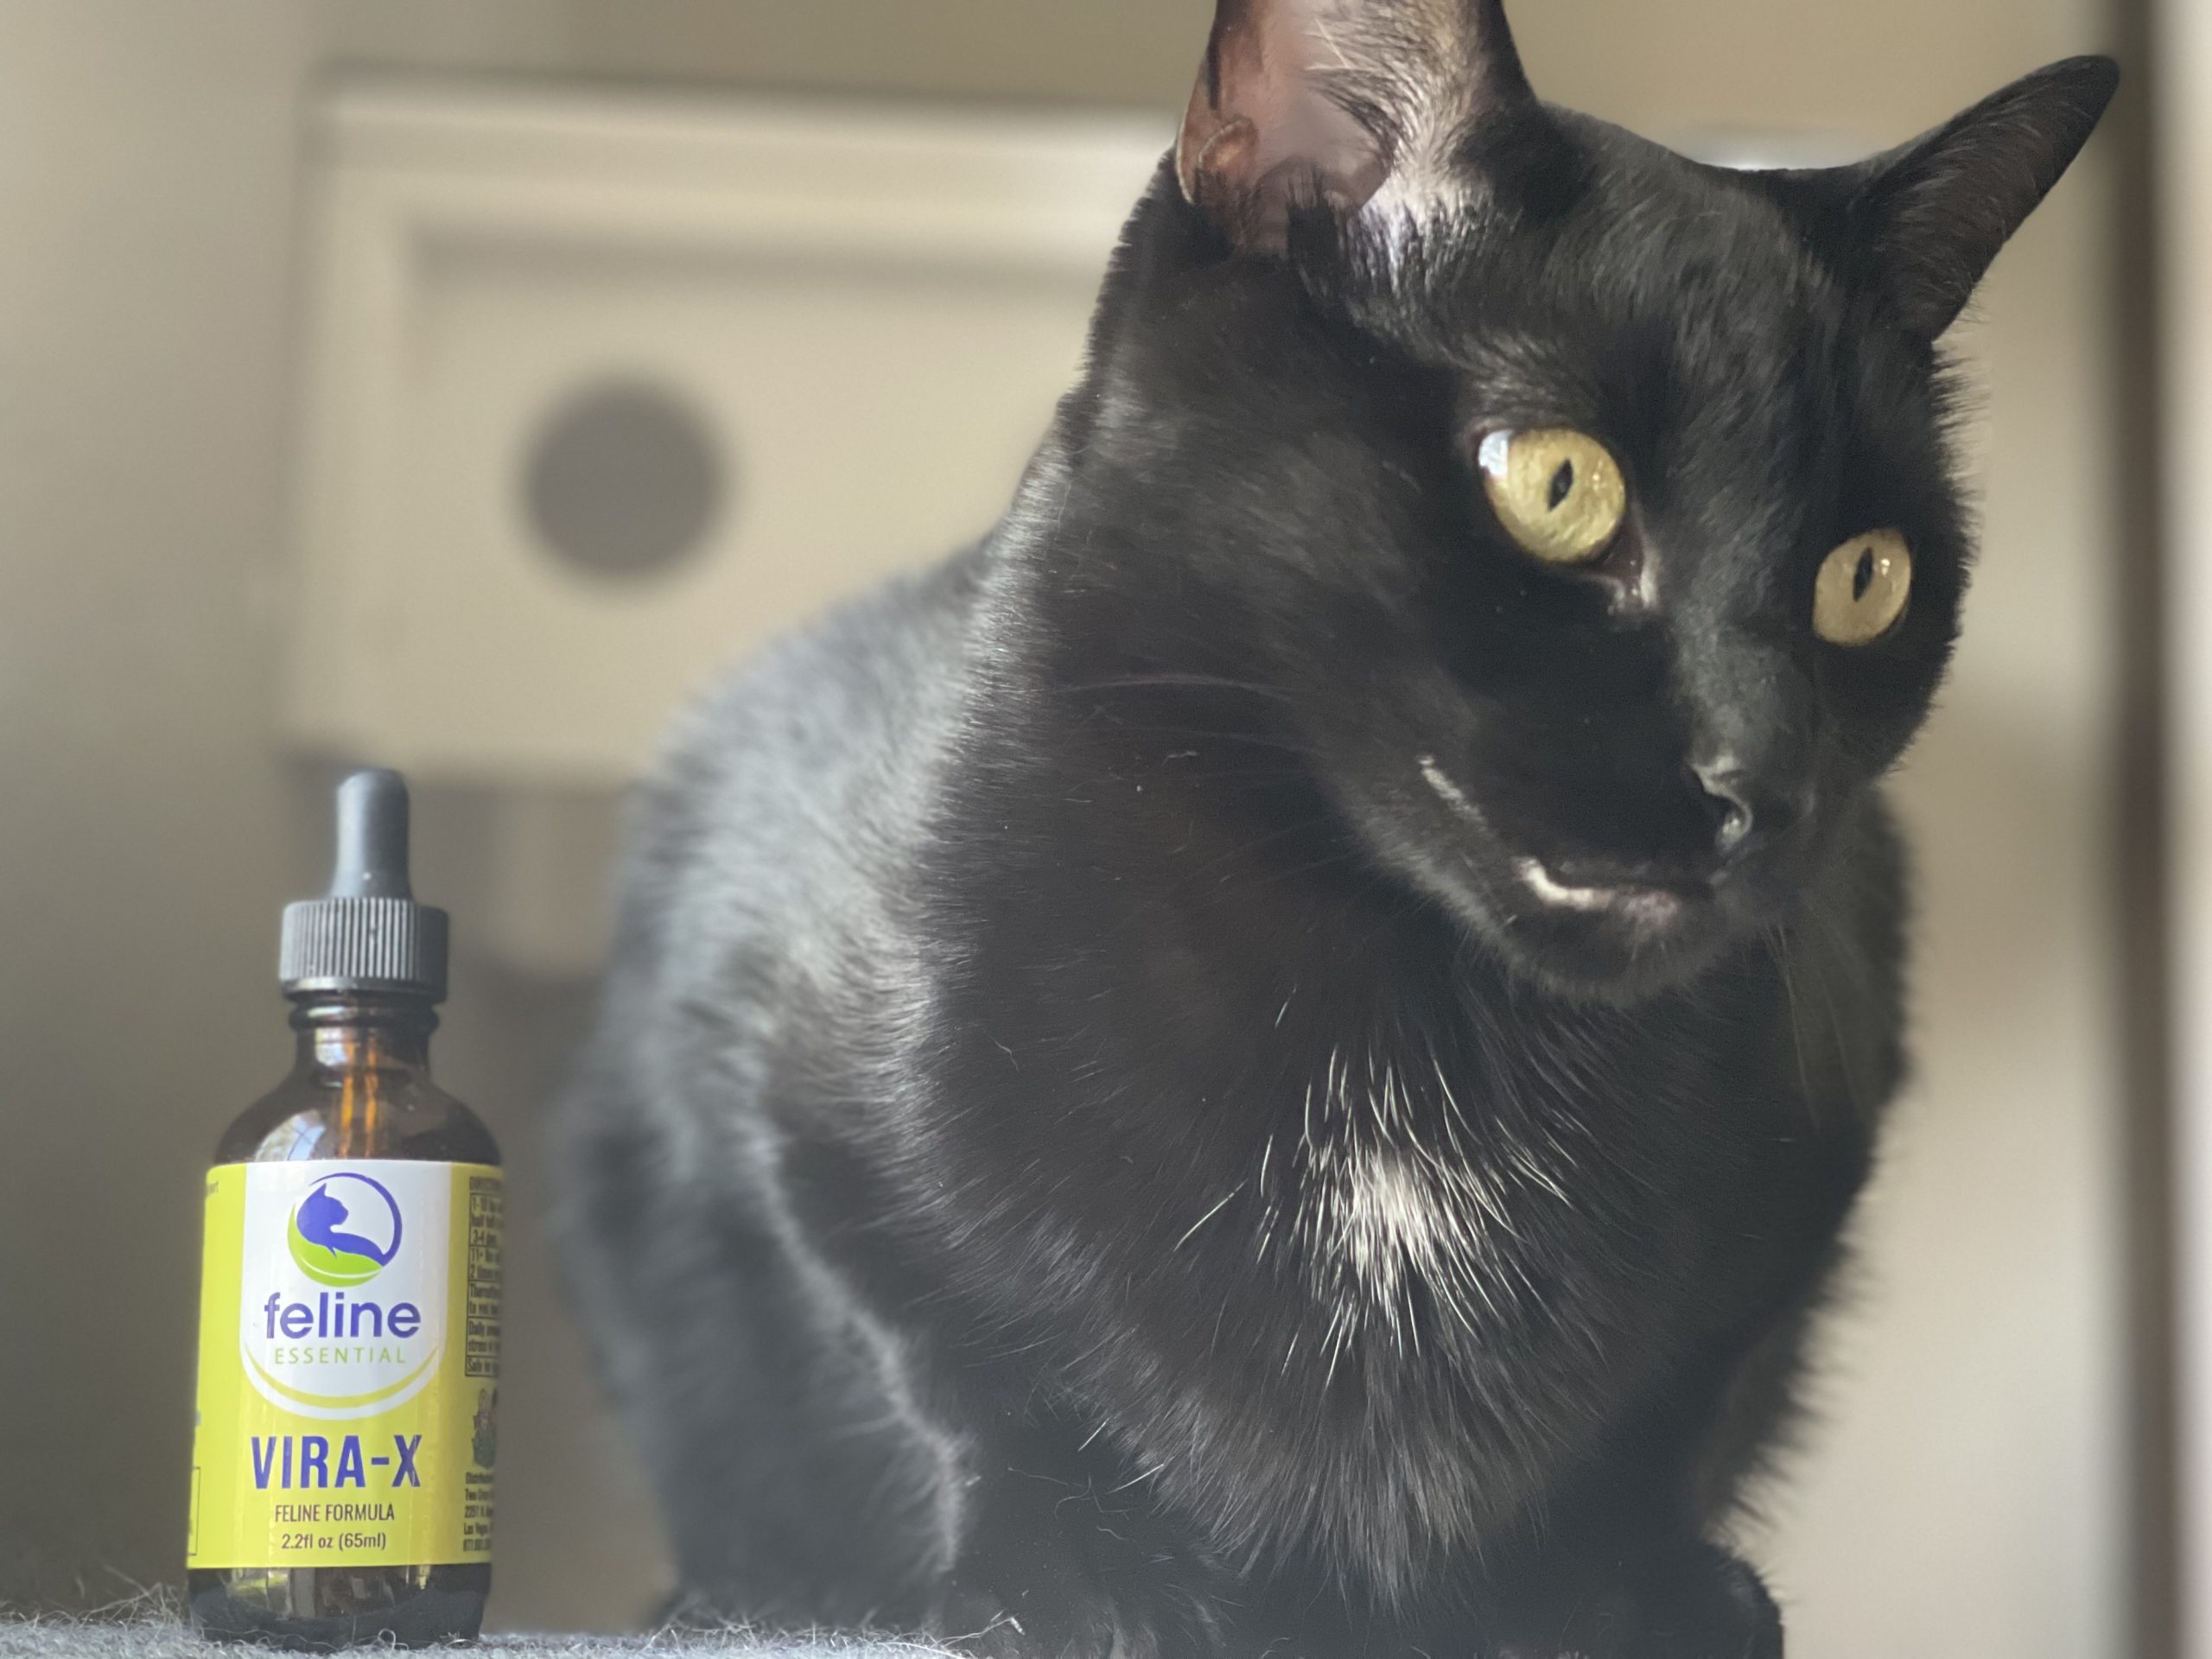 This is the best product for cat respiratory infections and symptoms like sneezing, coughing, runny eyes, labored breathing and more!